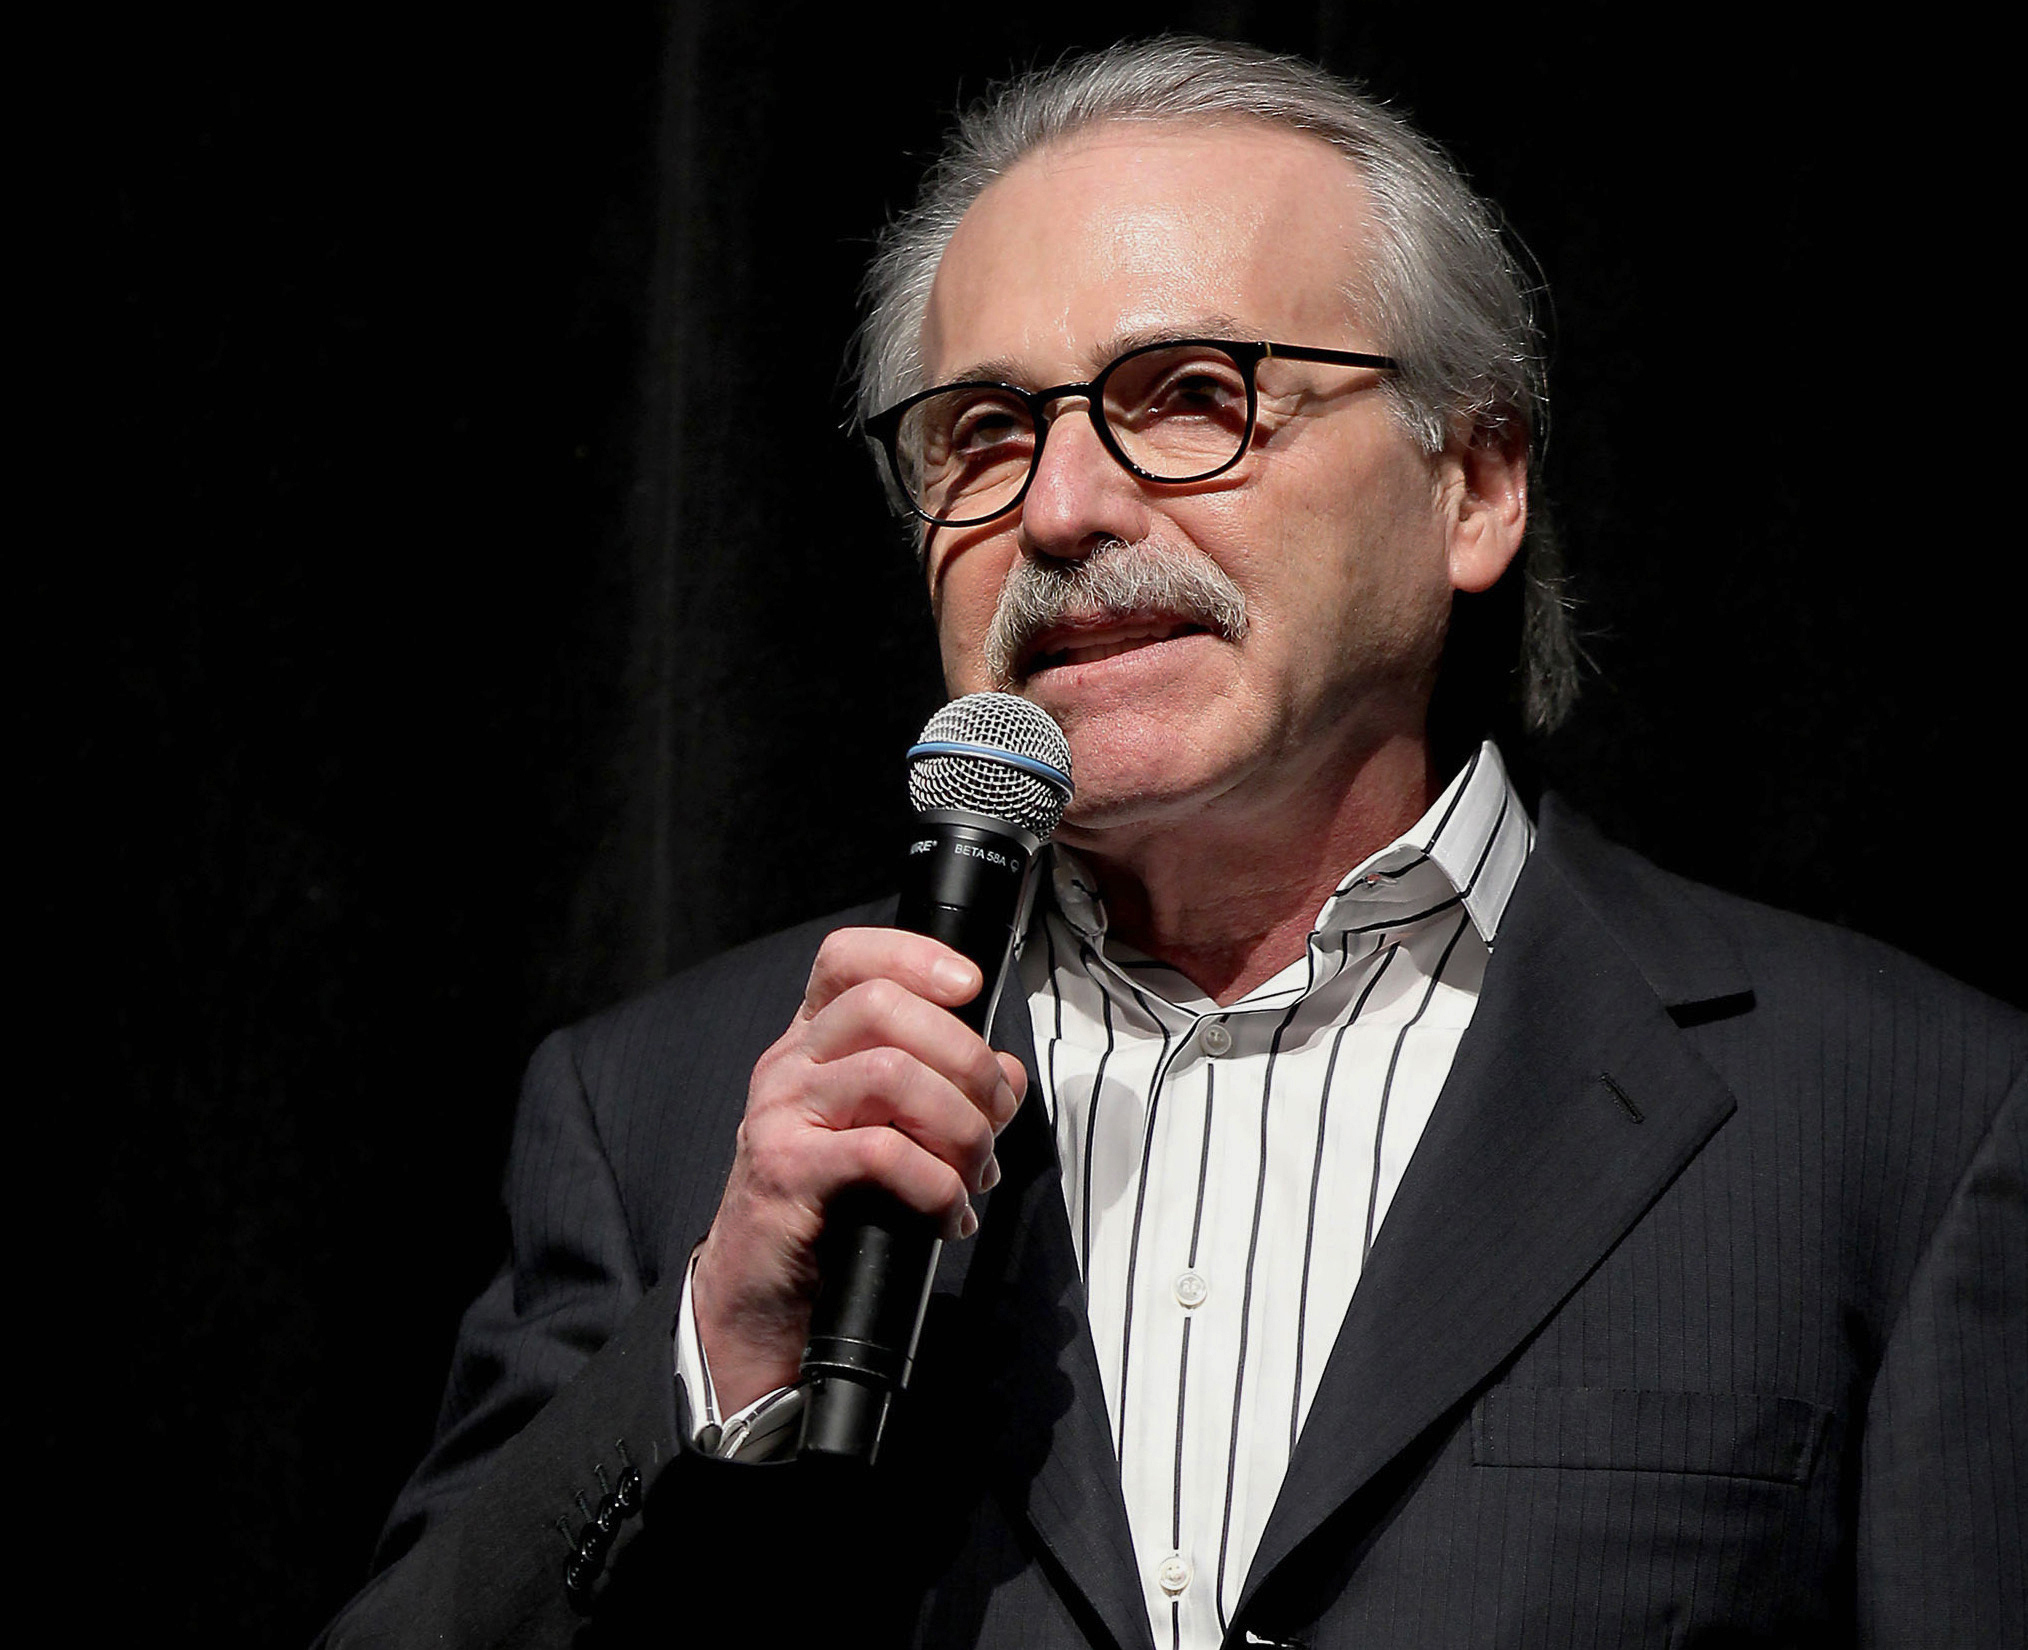 PHOTO: In this Jan. 31, 2014 photo, David Pecker, chairman and CEO of American Media, addresses those attending the Shape & Men's Fitness Super Bowl Party in New York. 